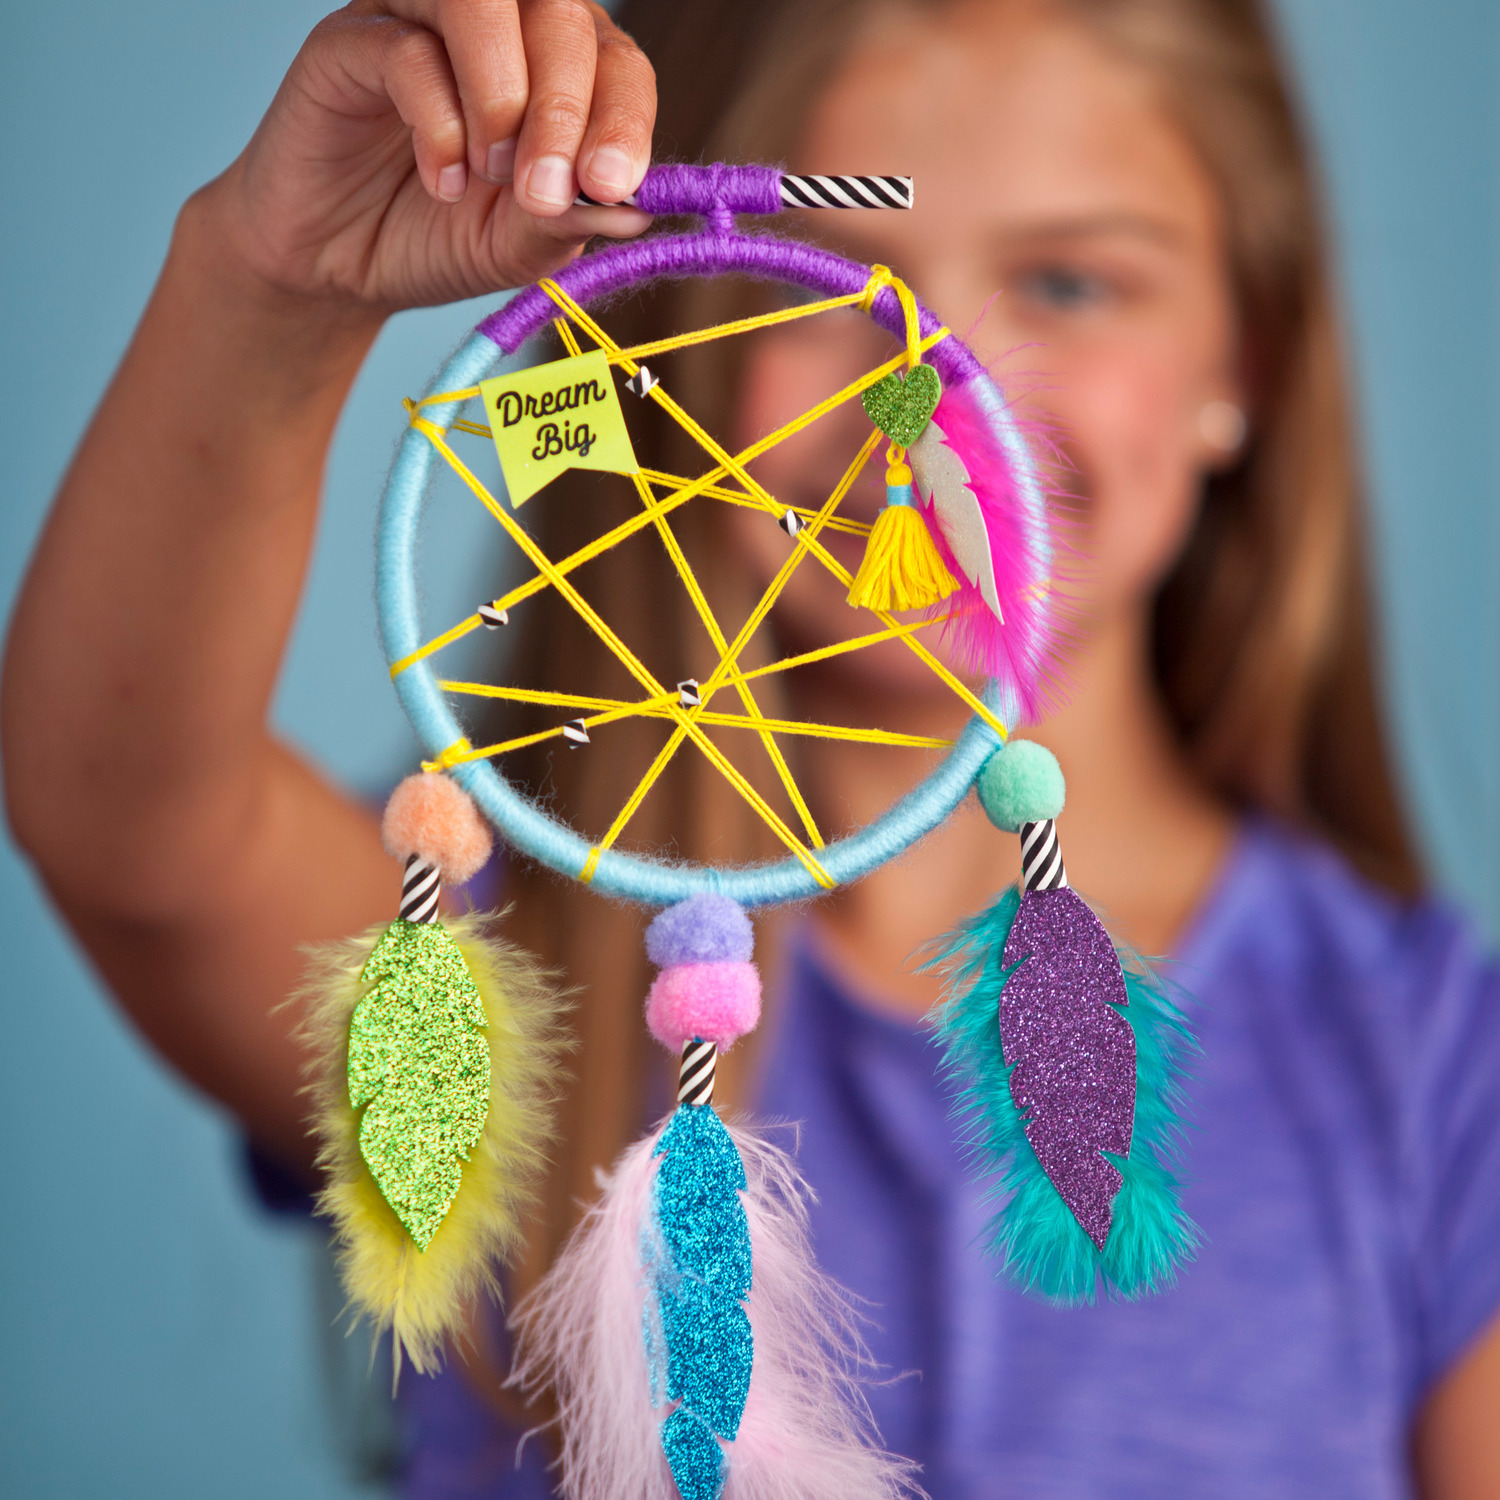 Dream Catchers kit — The Gift Hut- The Gift Hut - The Gift Hut - Arts and  Crafts - Toys Gifts 